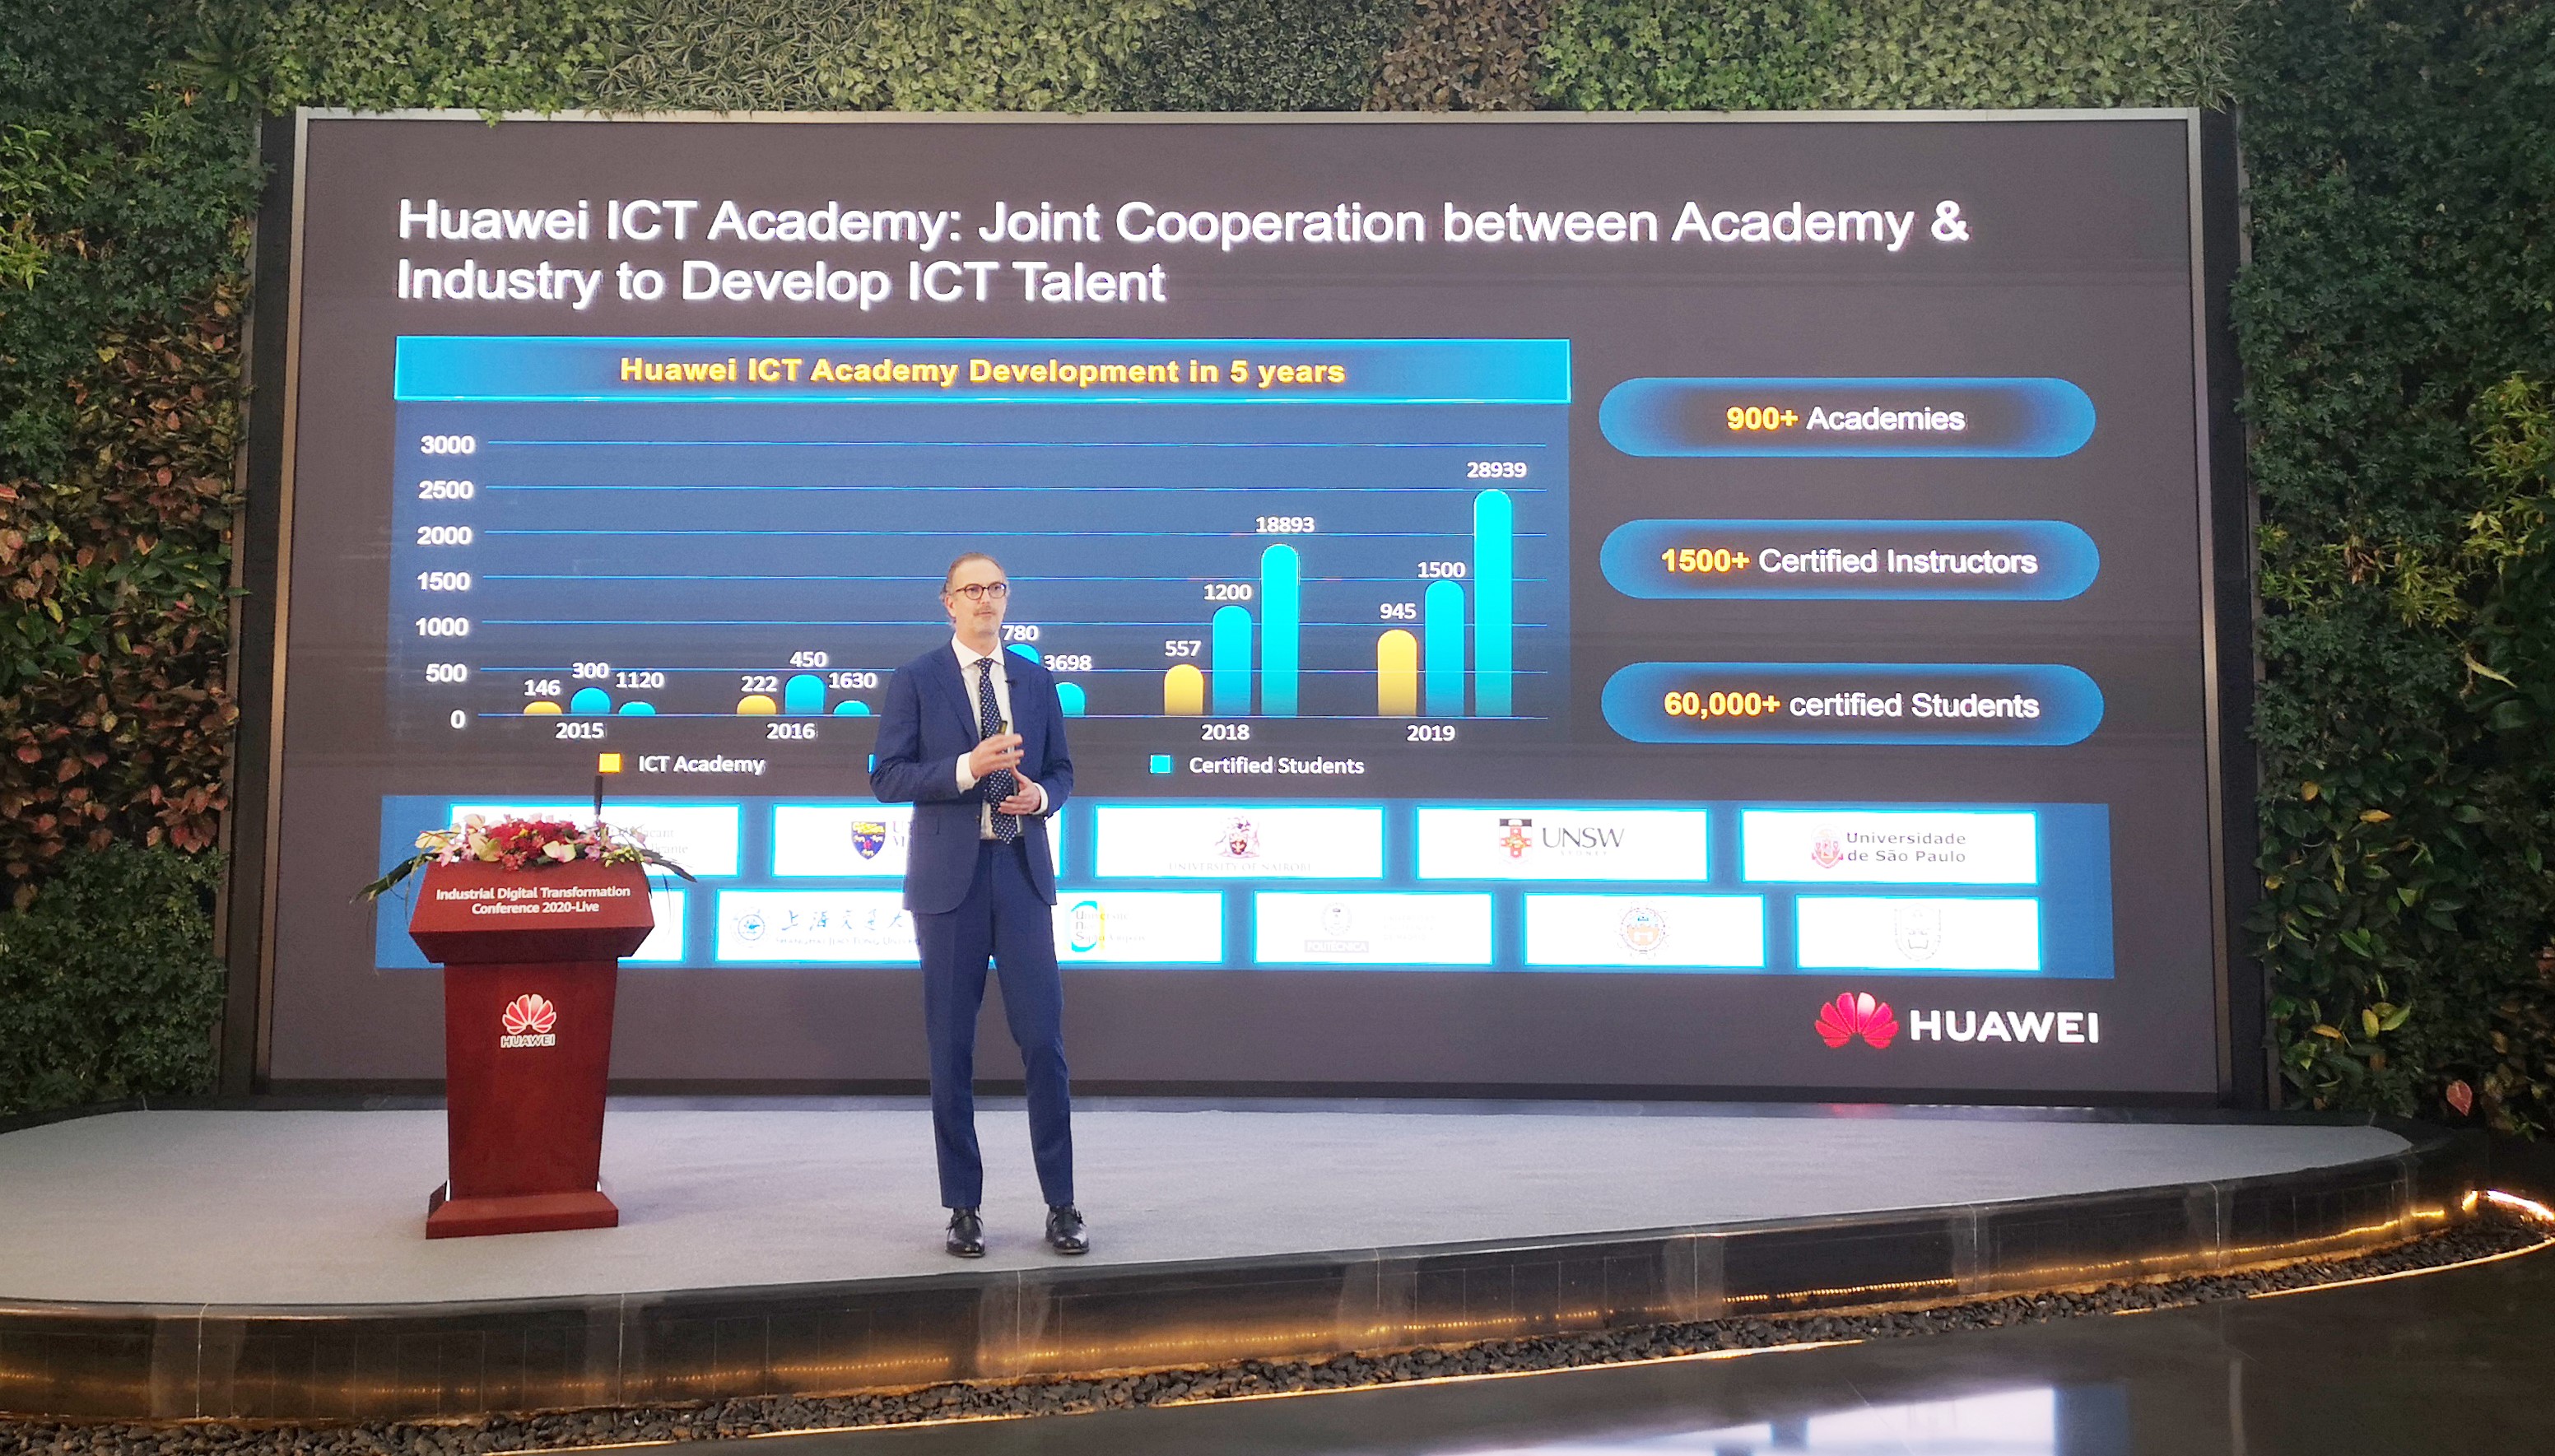 Huawei Releases Huawei ICT Academy Program 2.0, Set to Develop 2 Million ICT Professionals Over the Next Five Years